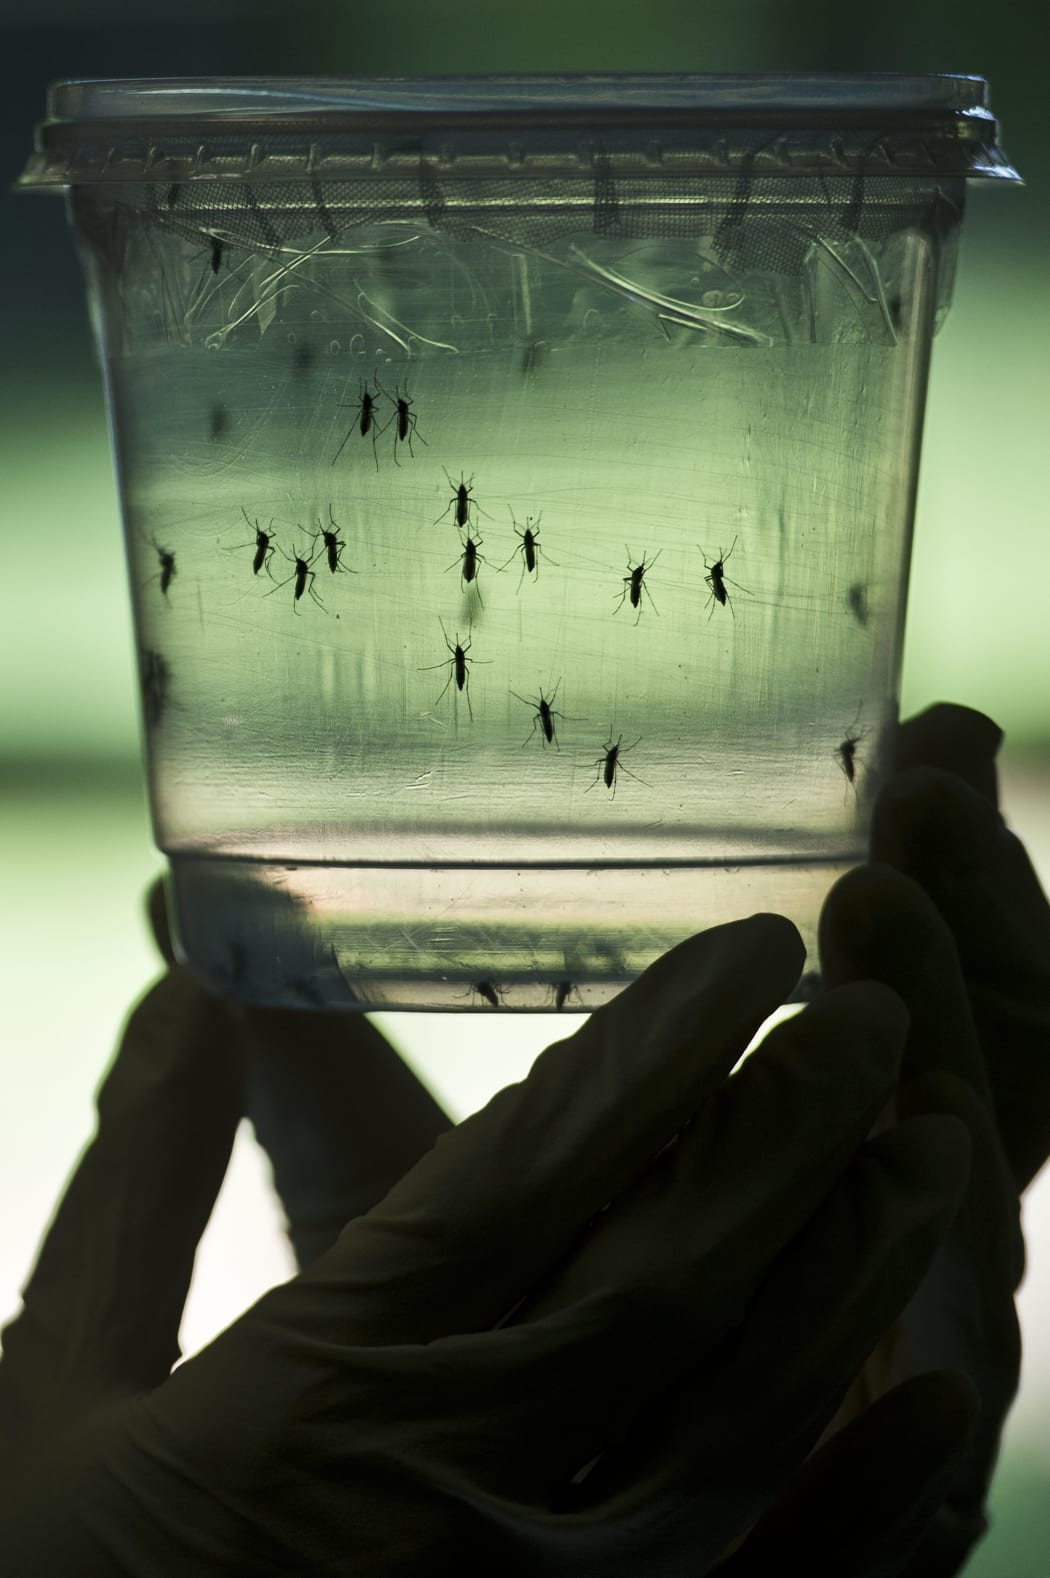 Aedes aegypti mosquitos, which can carry the zika virus, are seen in containers at a lab in Sao Paulo, Brazil.